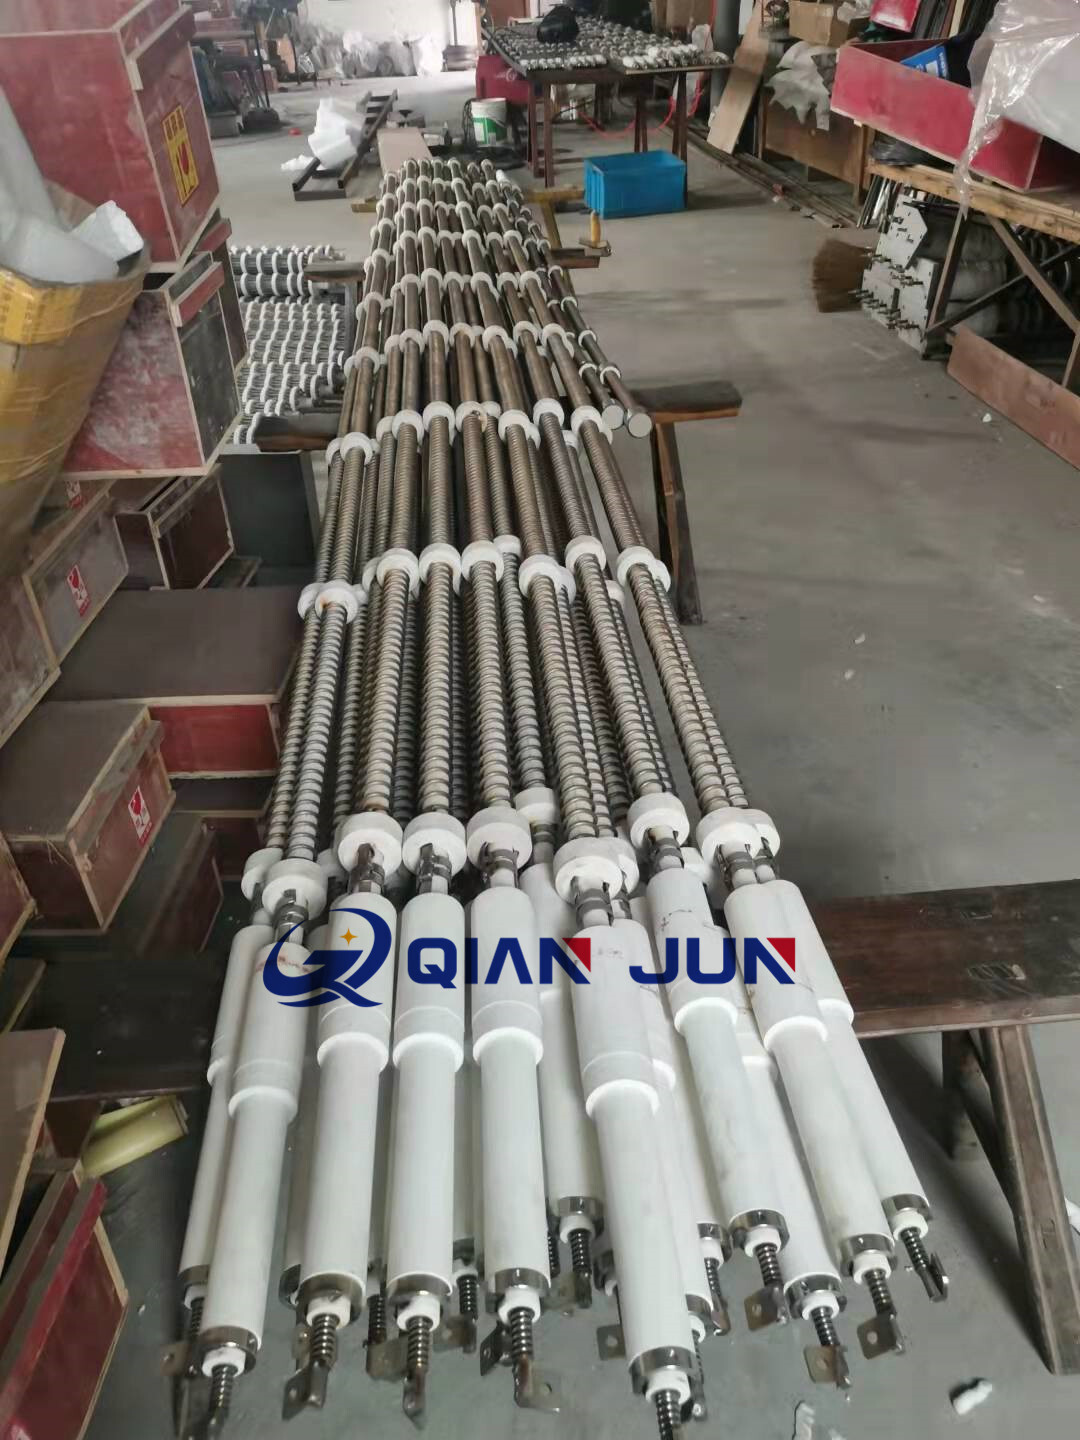 Heater coils for Tamglass tempering furnace machine